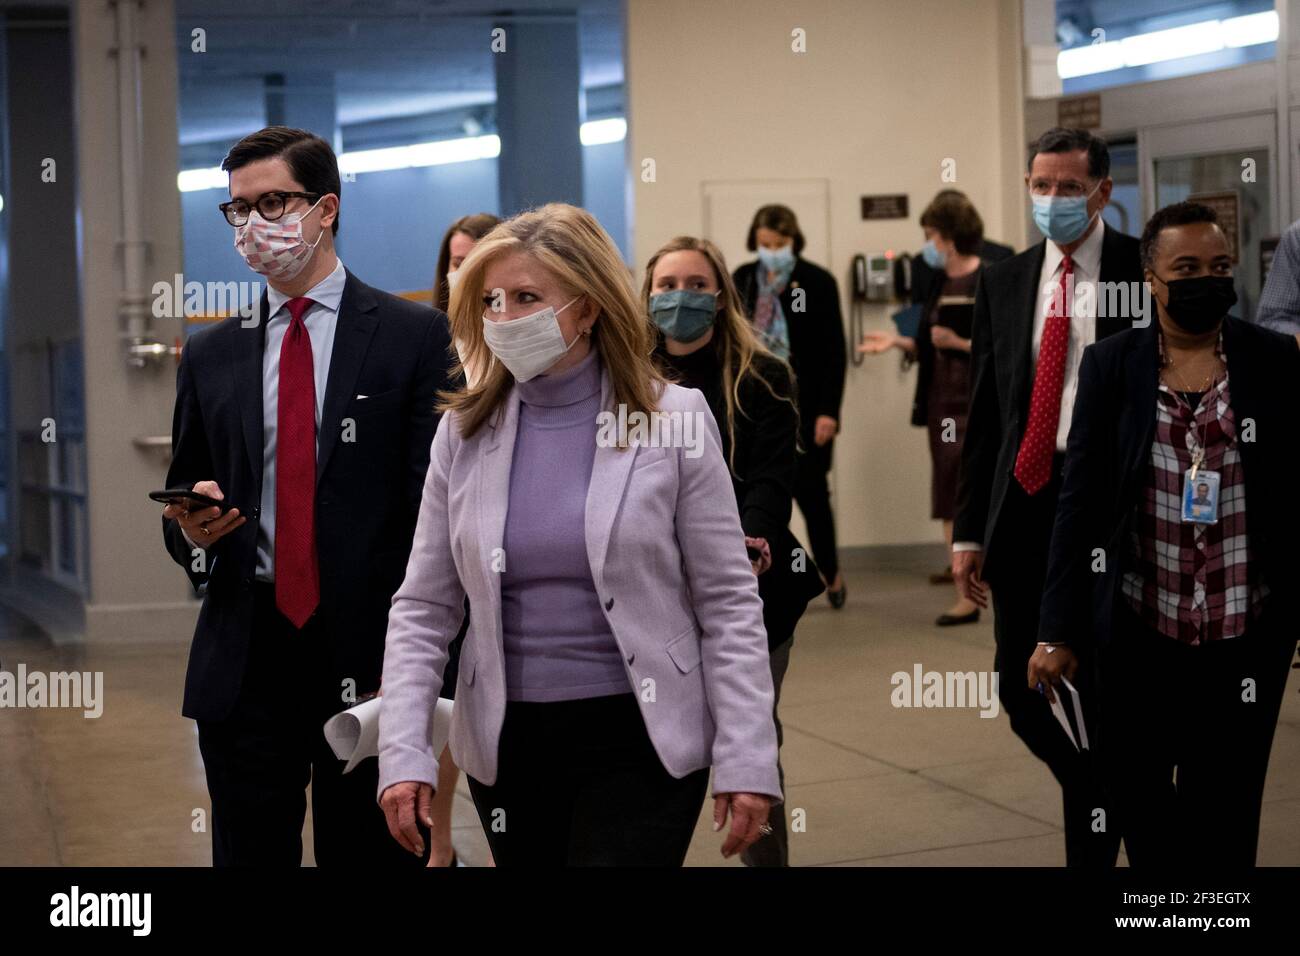 United States Senator Marsha Blackburn (Republican of Tennessee), left, and United States Senator John Barrasso (Republican of Wyoming), right, make their way through the Senate subway for a vote at the U.S. Capitol in Washington, DC, Tuesday, March 16, 2021. Credit: Rod Lamkey/CNP | usage worldwide Stock Photo